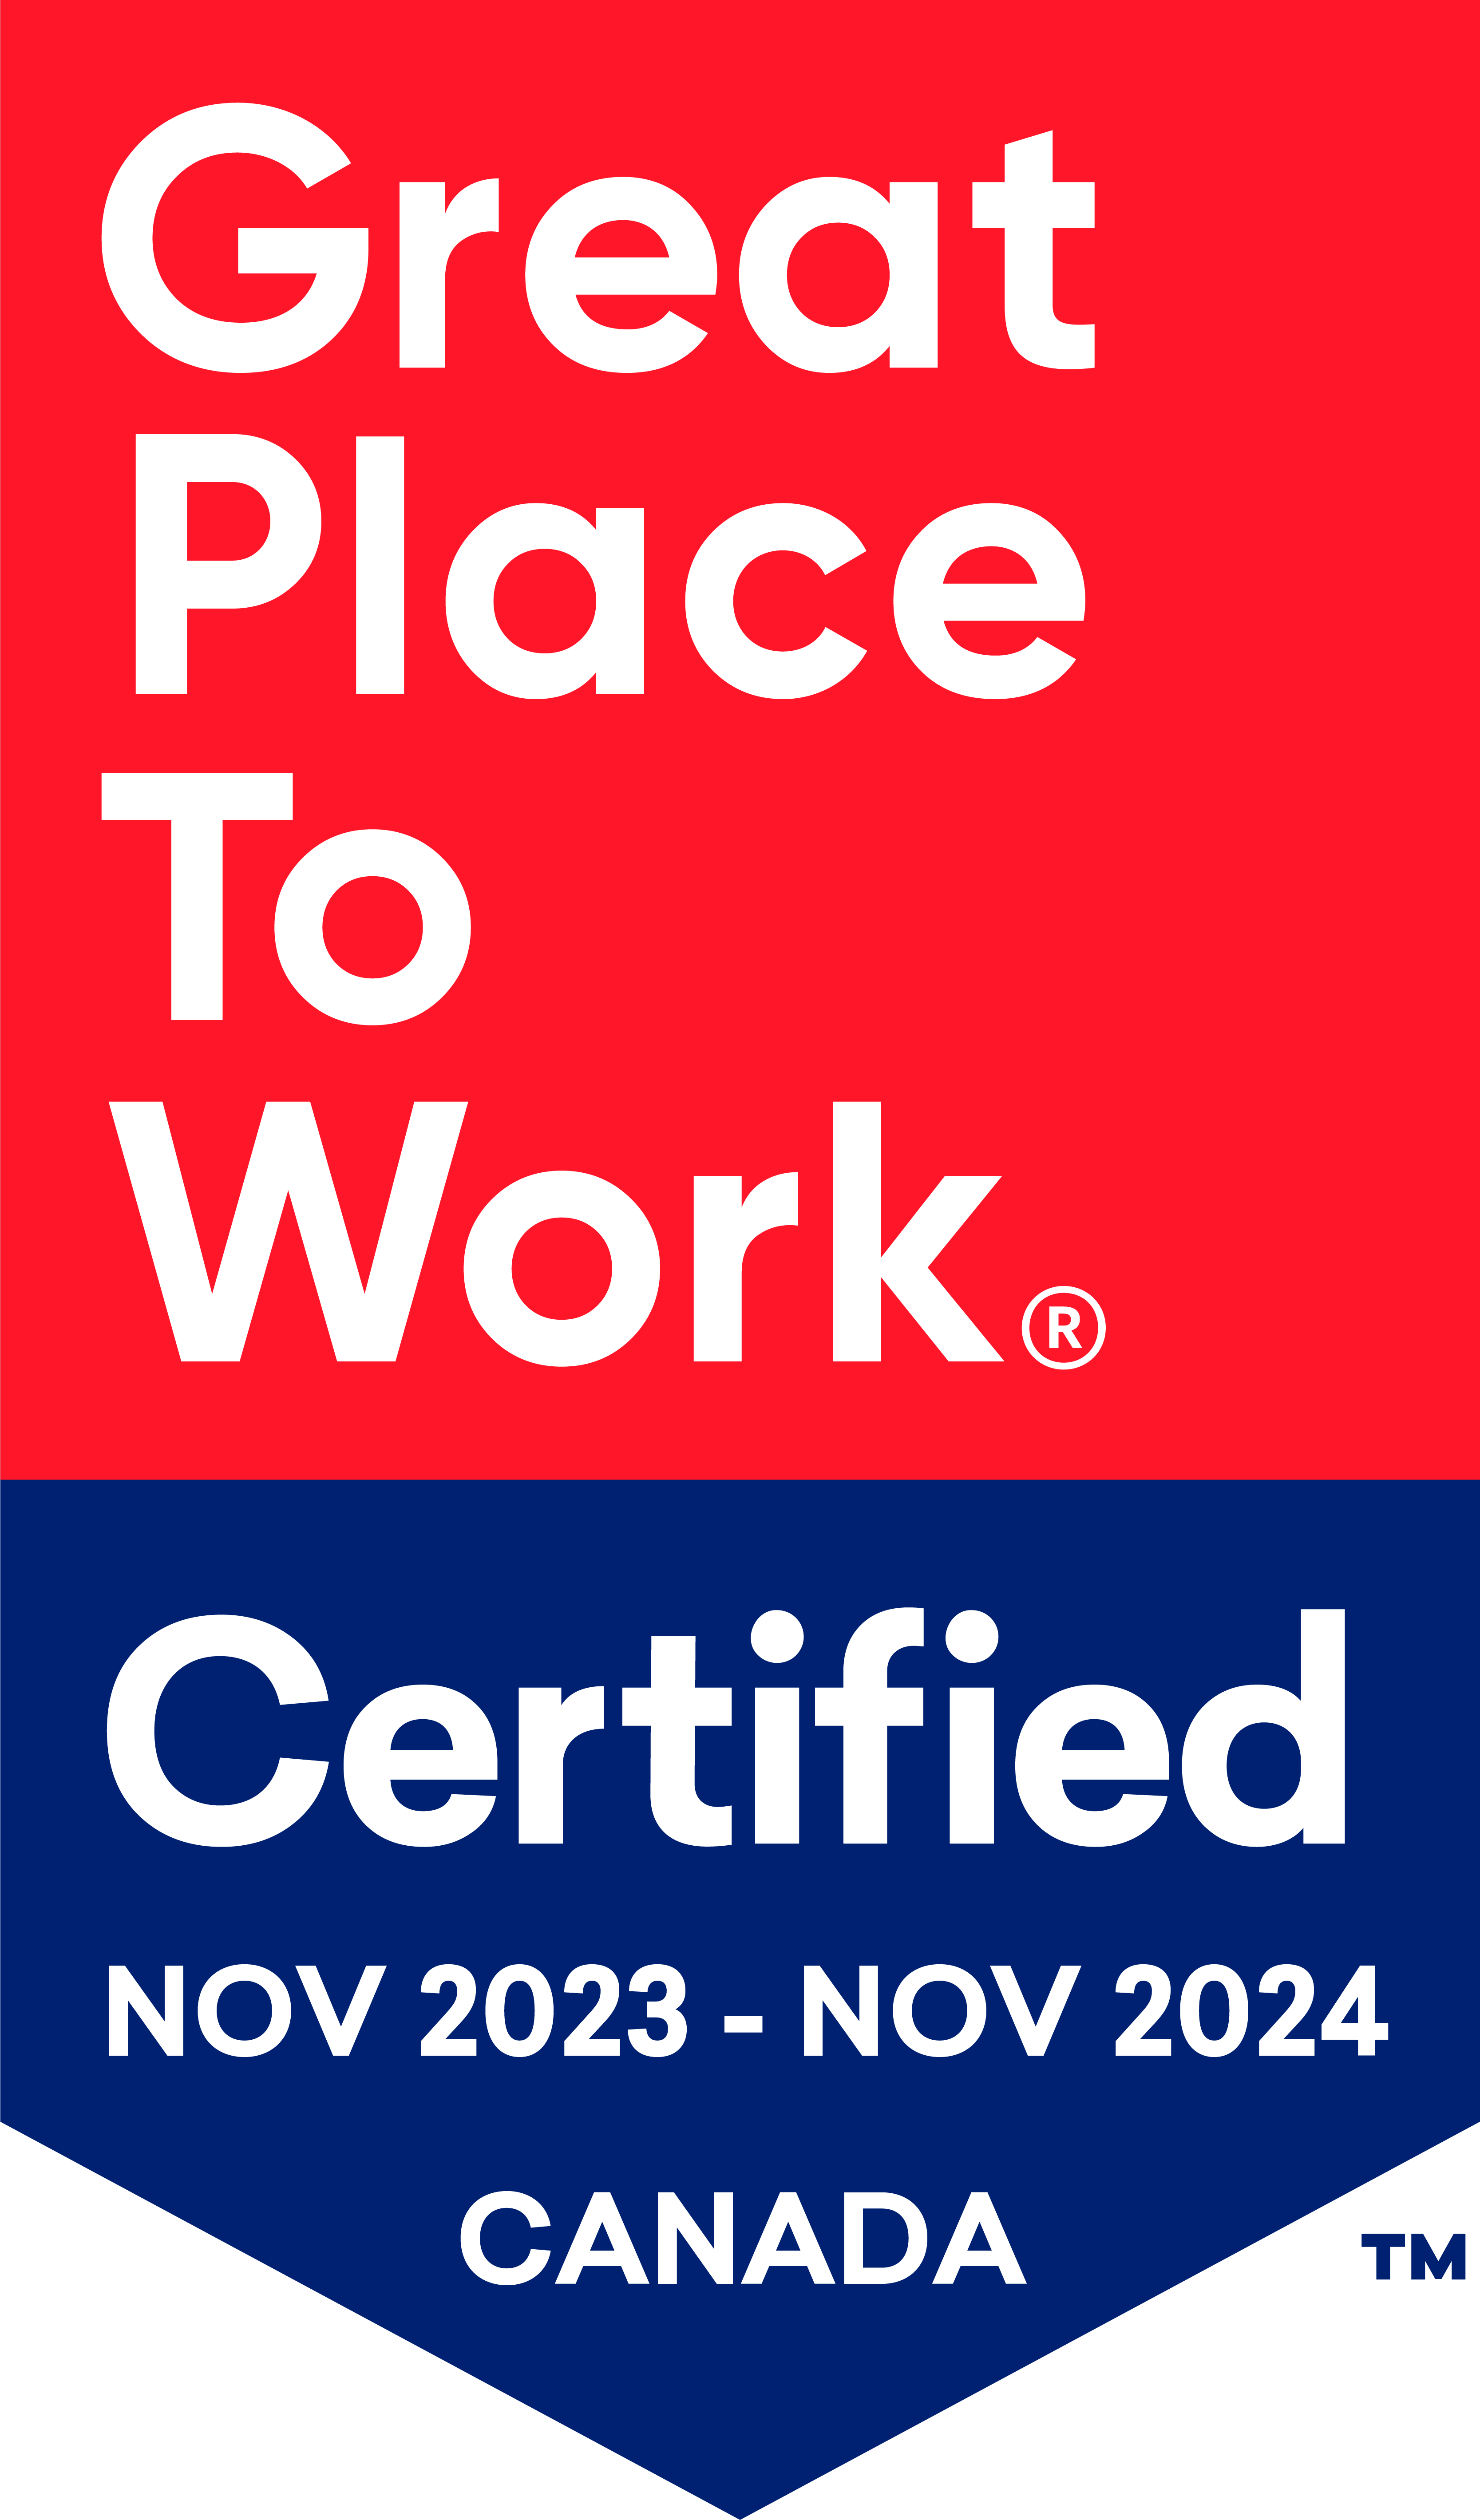 Great Place To Work Certified Oct 2023-2024